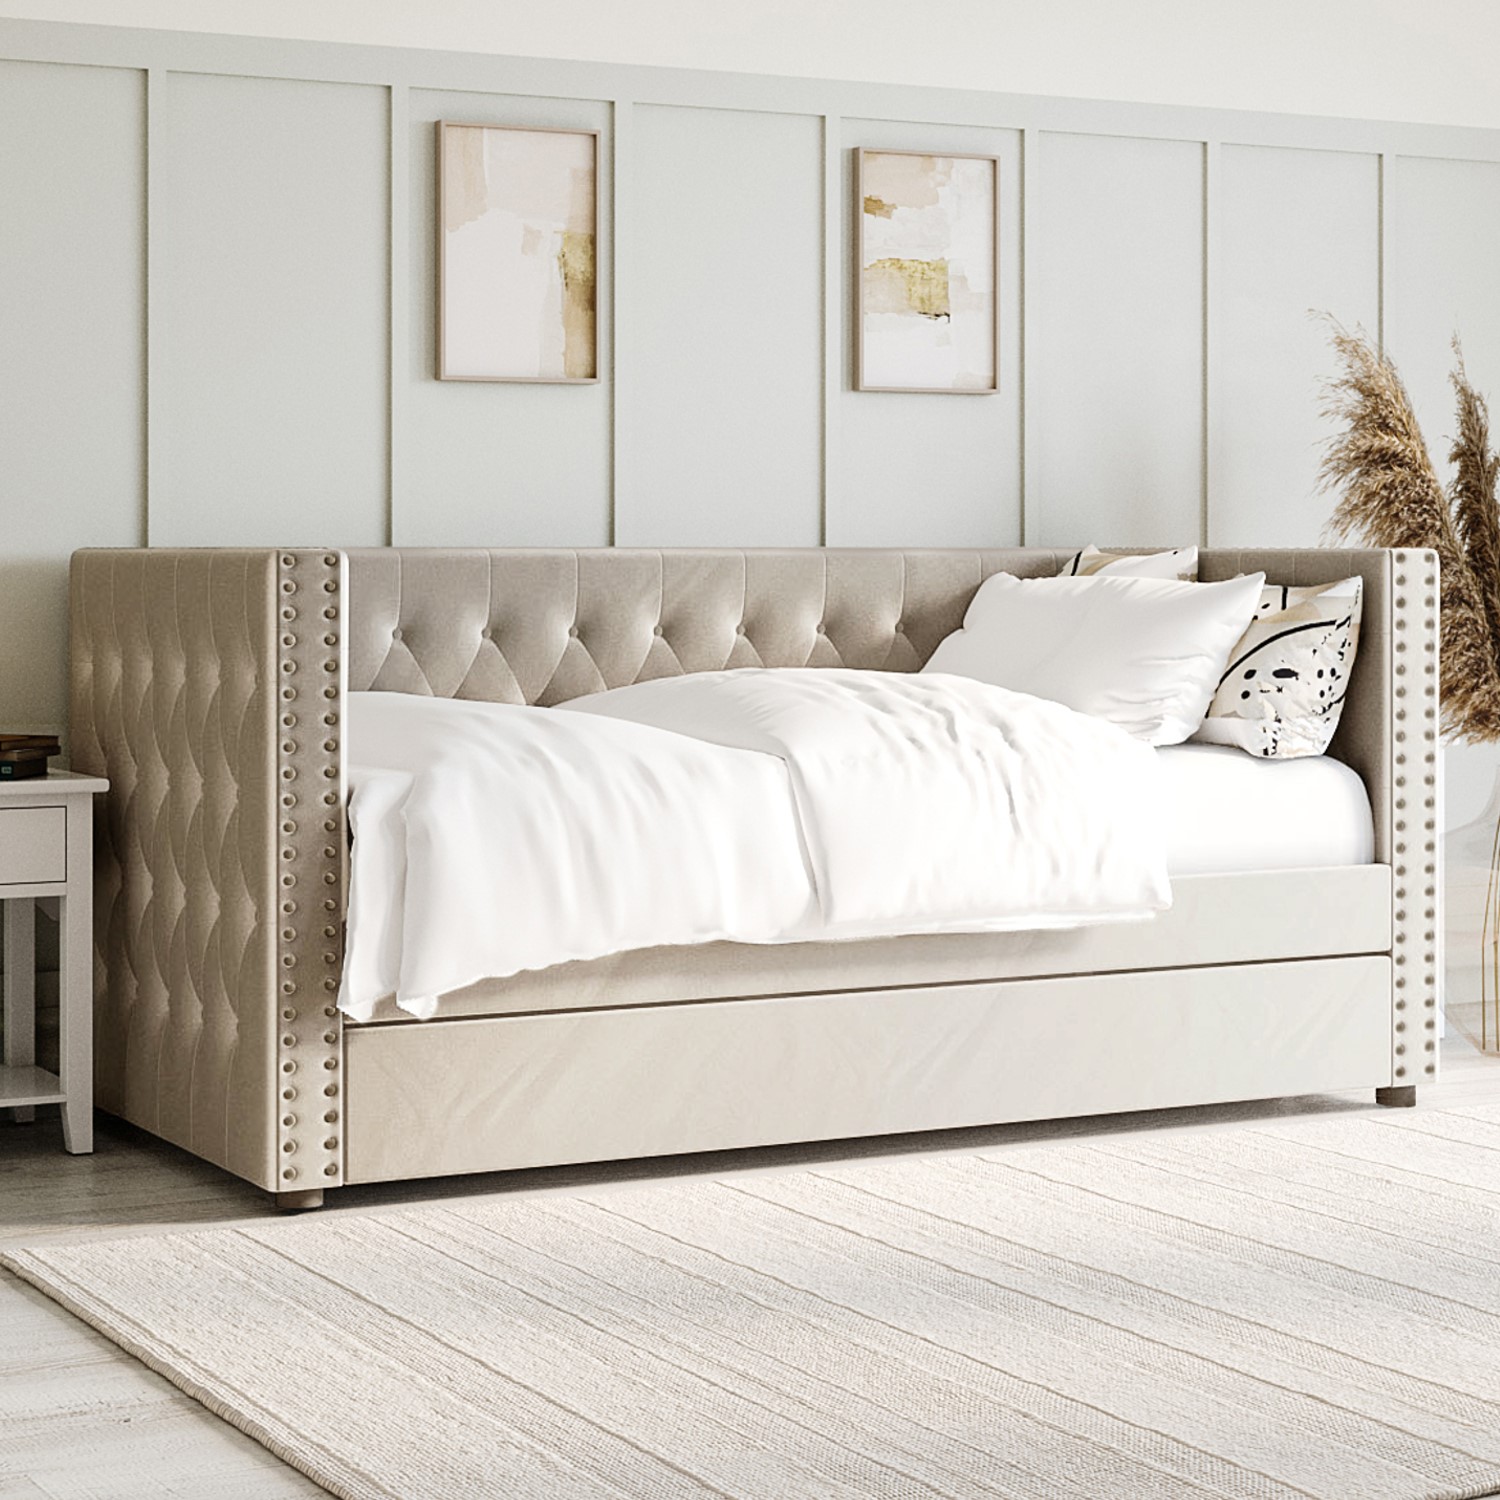 Read more about Single day bed sofa with trundle in beige velvet sacha